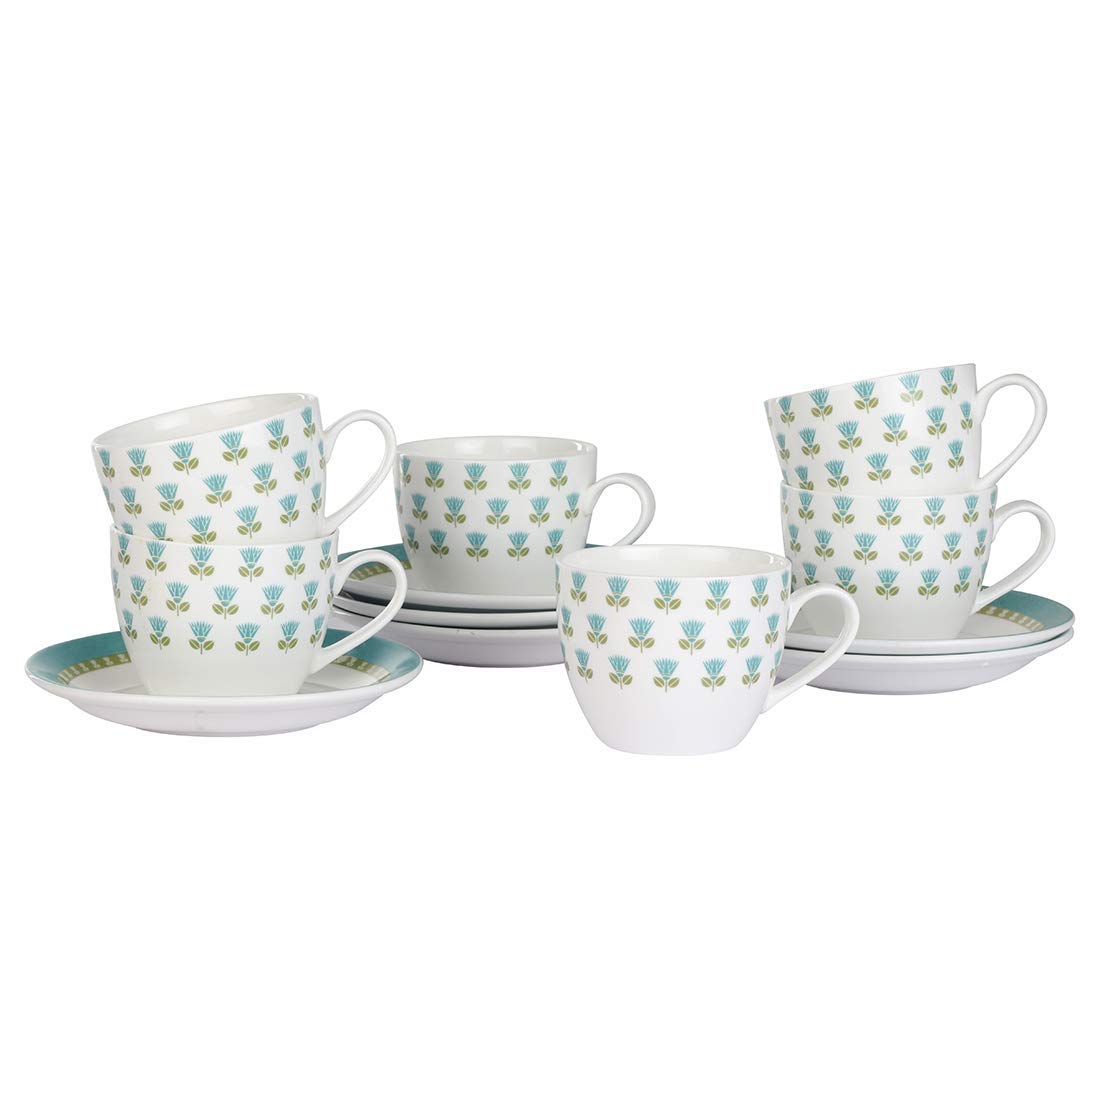 Ceramic Rich Orchid Tea Cup Set with Saucer, 200 ML, 6 Cups, 6 Saucers, Femora